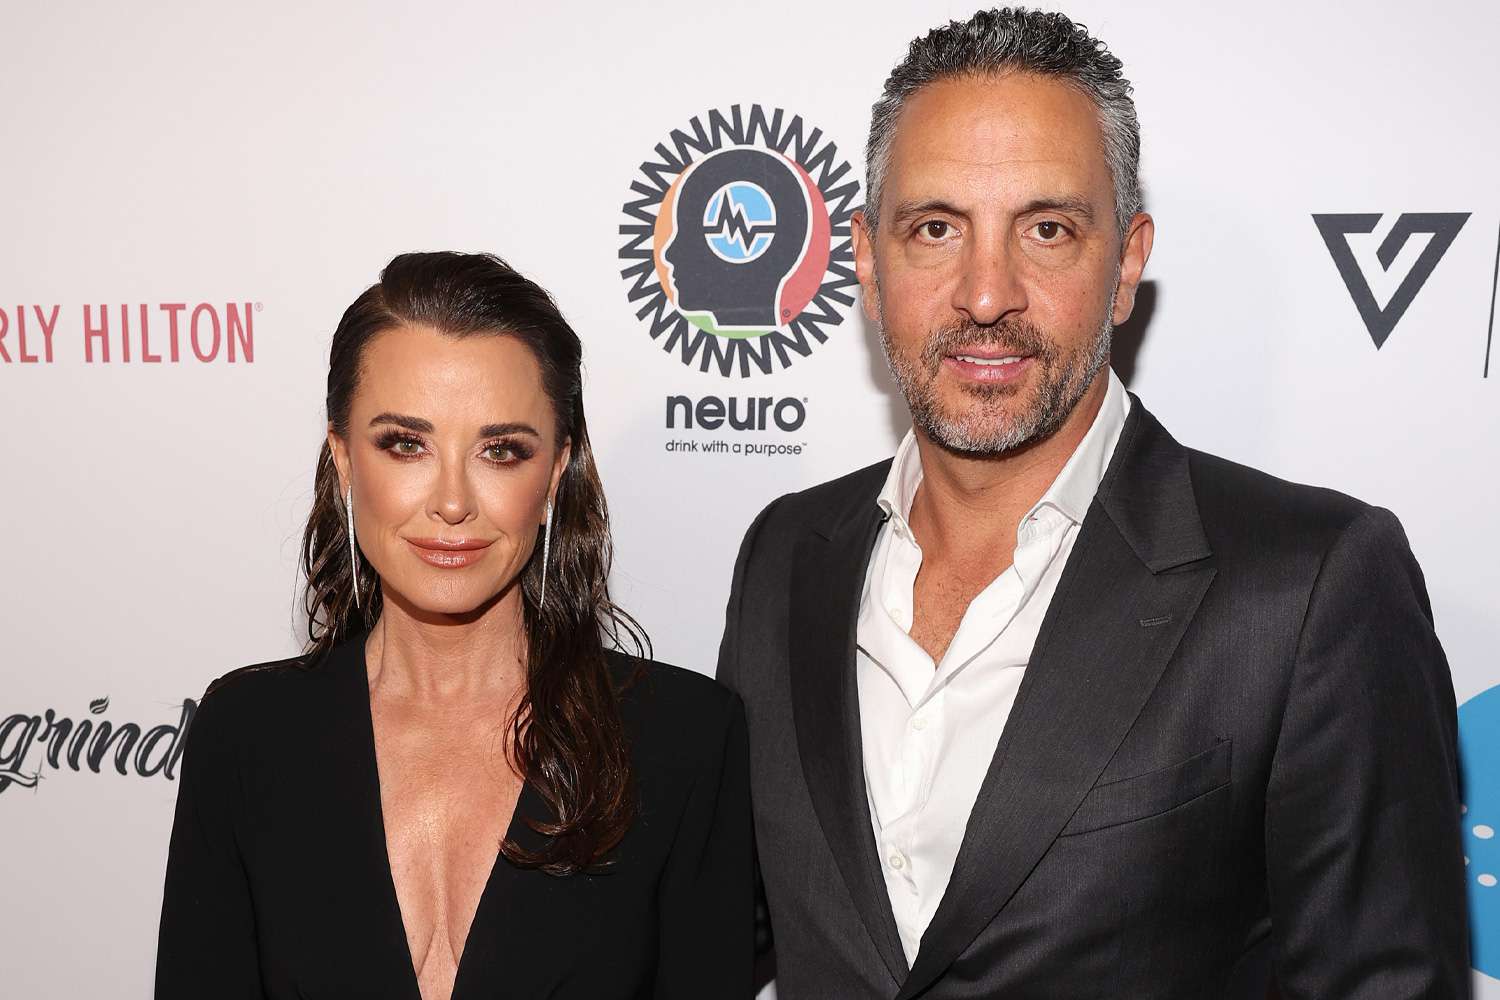 Kyle Richards Breaks Down At BravoCon Over Mauricio Umansky Separation – Trying To Navigate The Challenges